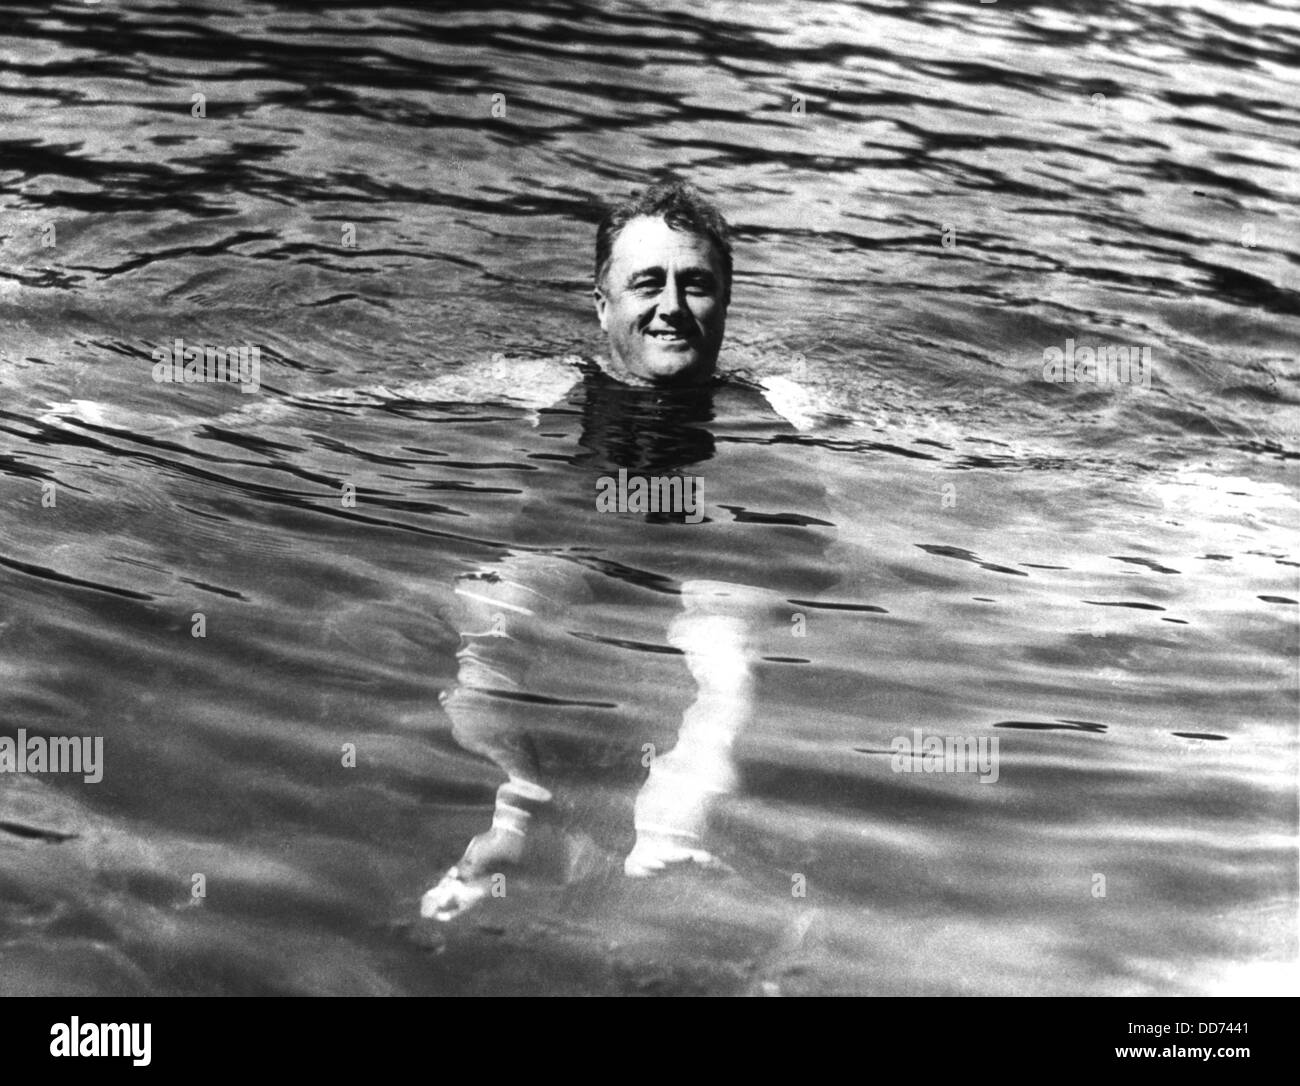 Gov. Franklin Roosevelt swimming in Warm Springs, Georgia. 1929. FDR was in his first year as Governor of New York State. Stock Photo